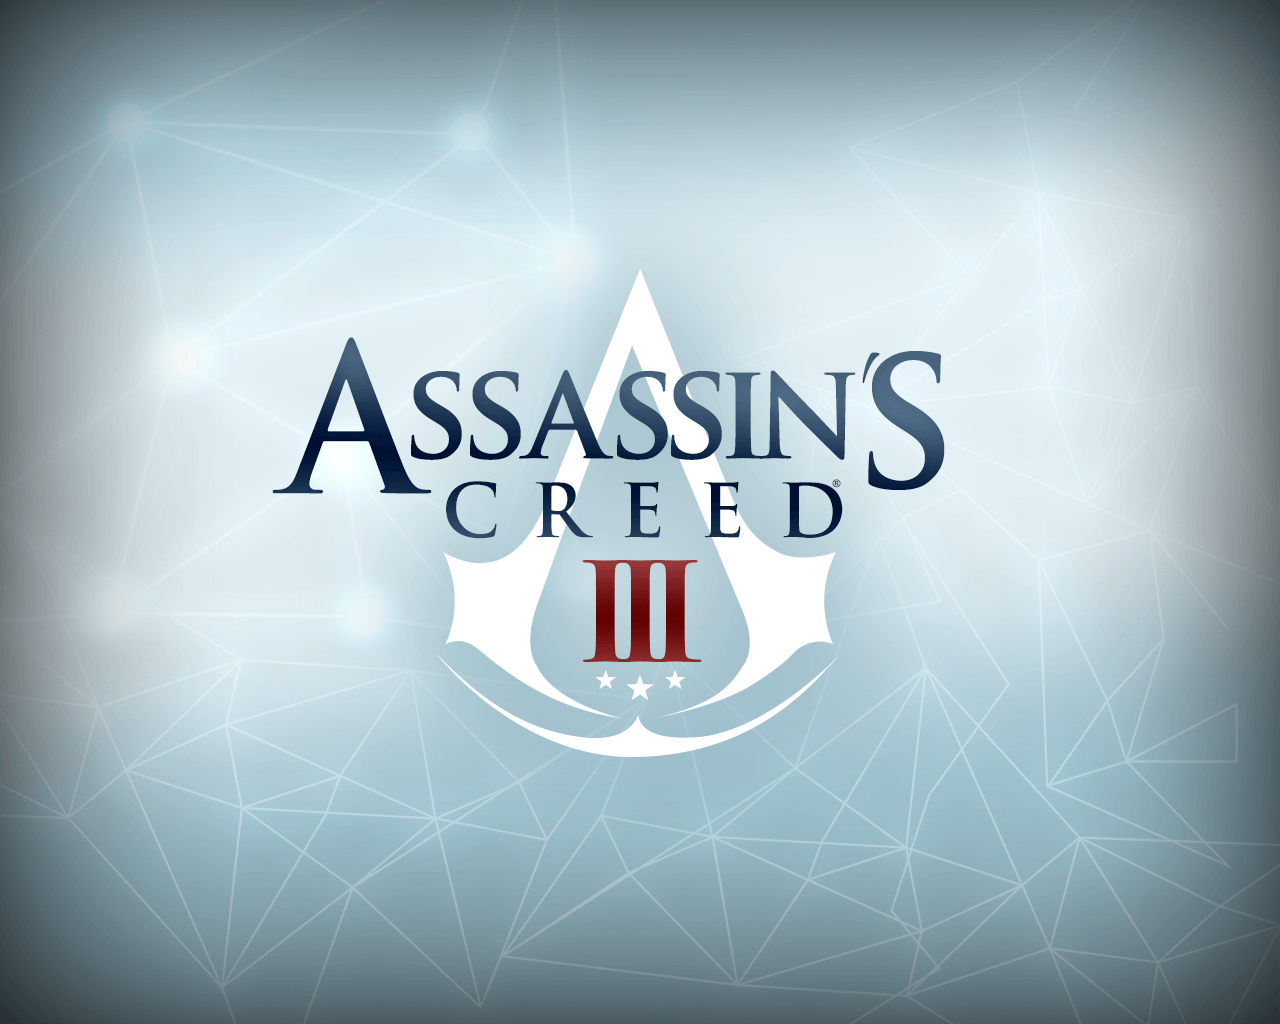 AC3 Logo - Assassin's Creed 3 LOGO image - tomsons26 - Indie DB